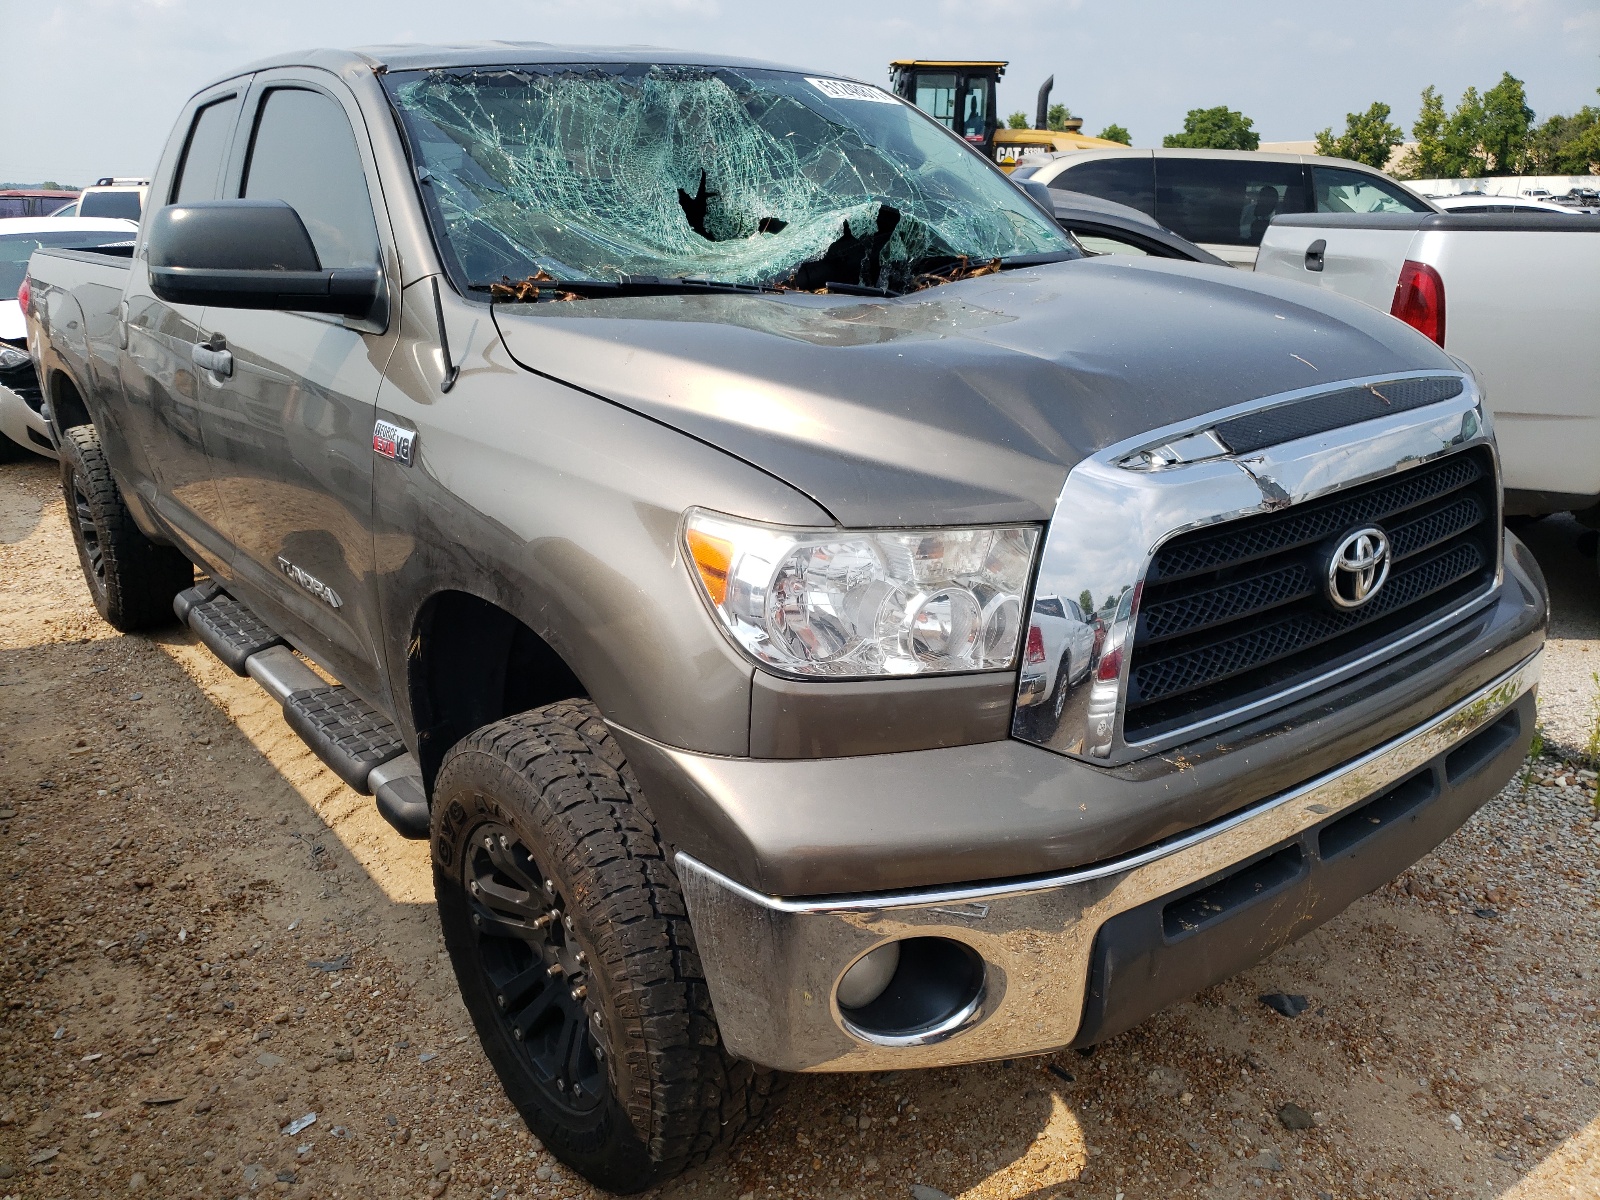 2008 TOYOTA TUNDRA DOUBLE CAB for Sale | MO - ST. LOUIS | Fri. Aug 20, 2021 - Used & Salvage Used Toyota Tundra For Sale St Louis